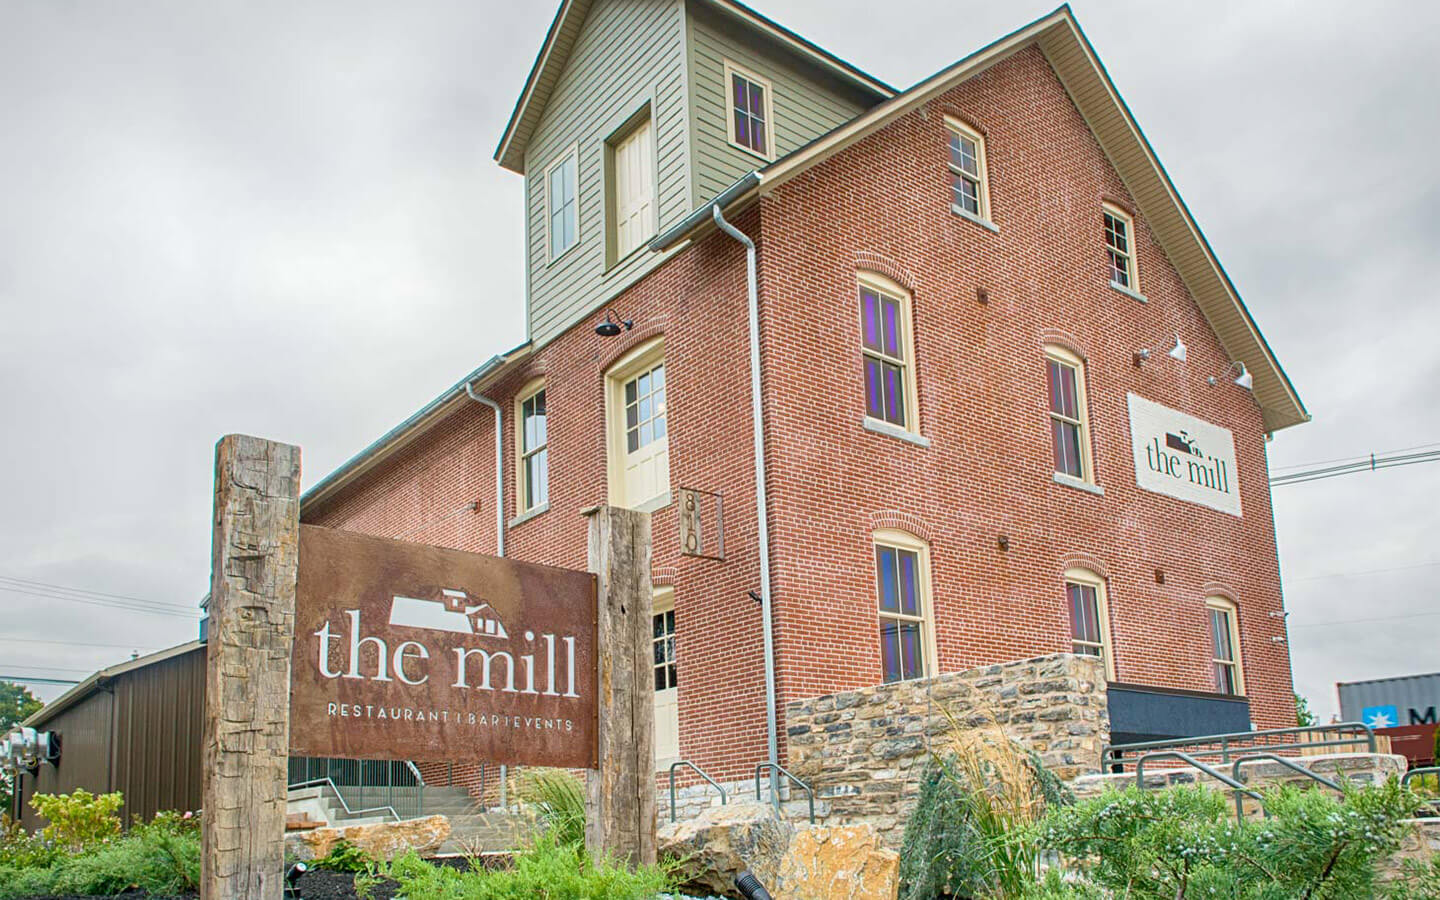 The Mill Restaurant in Hershey, PA